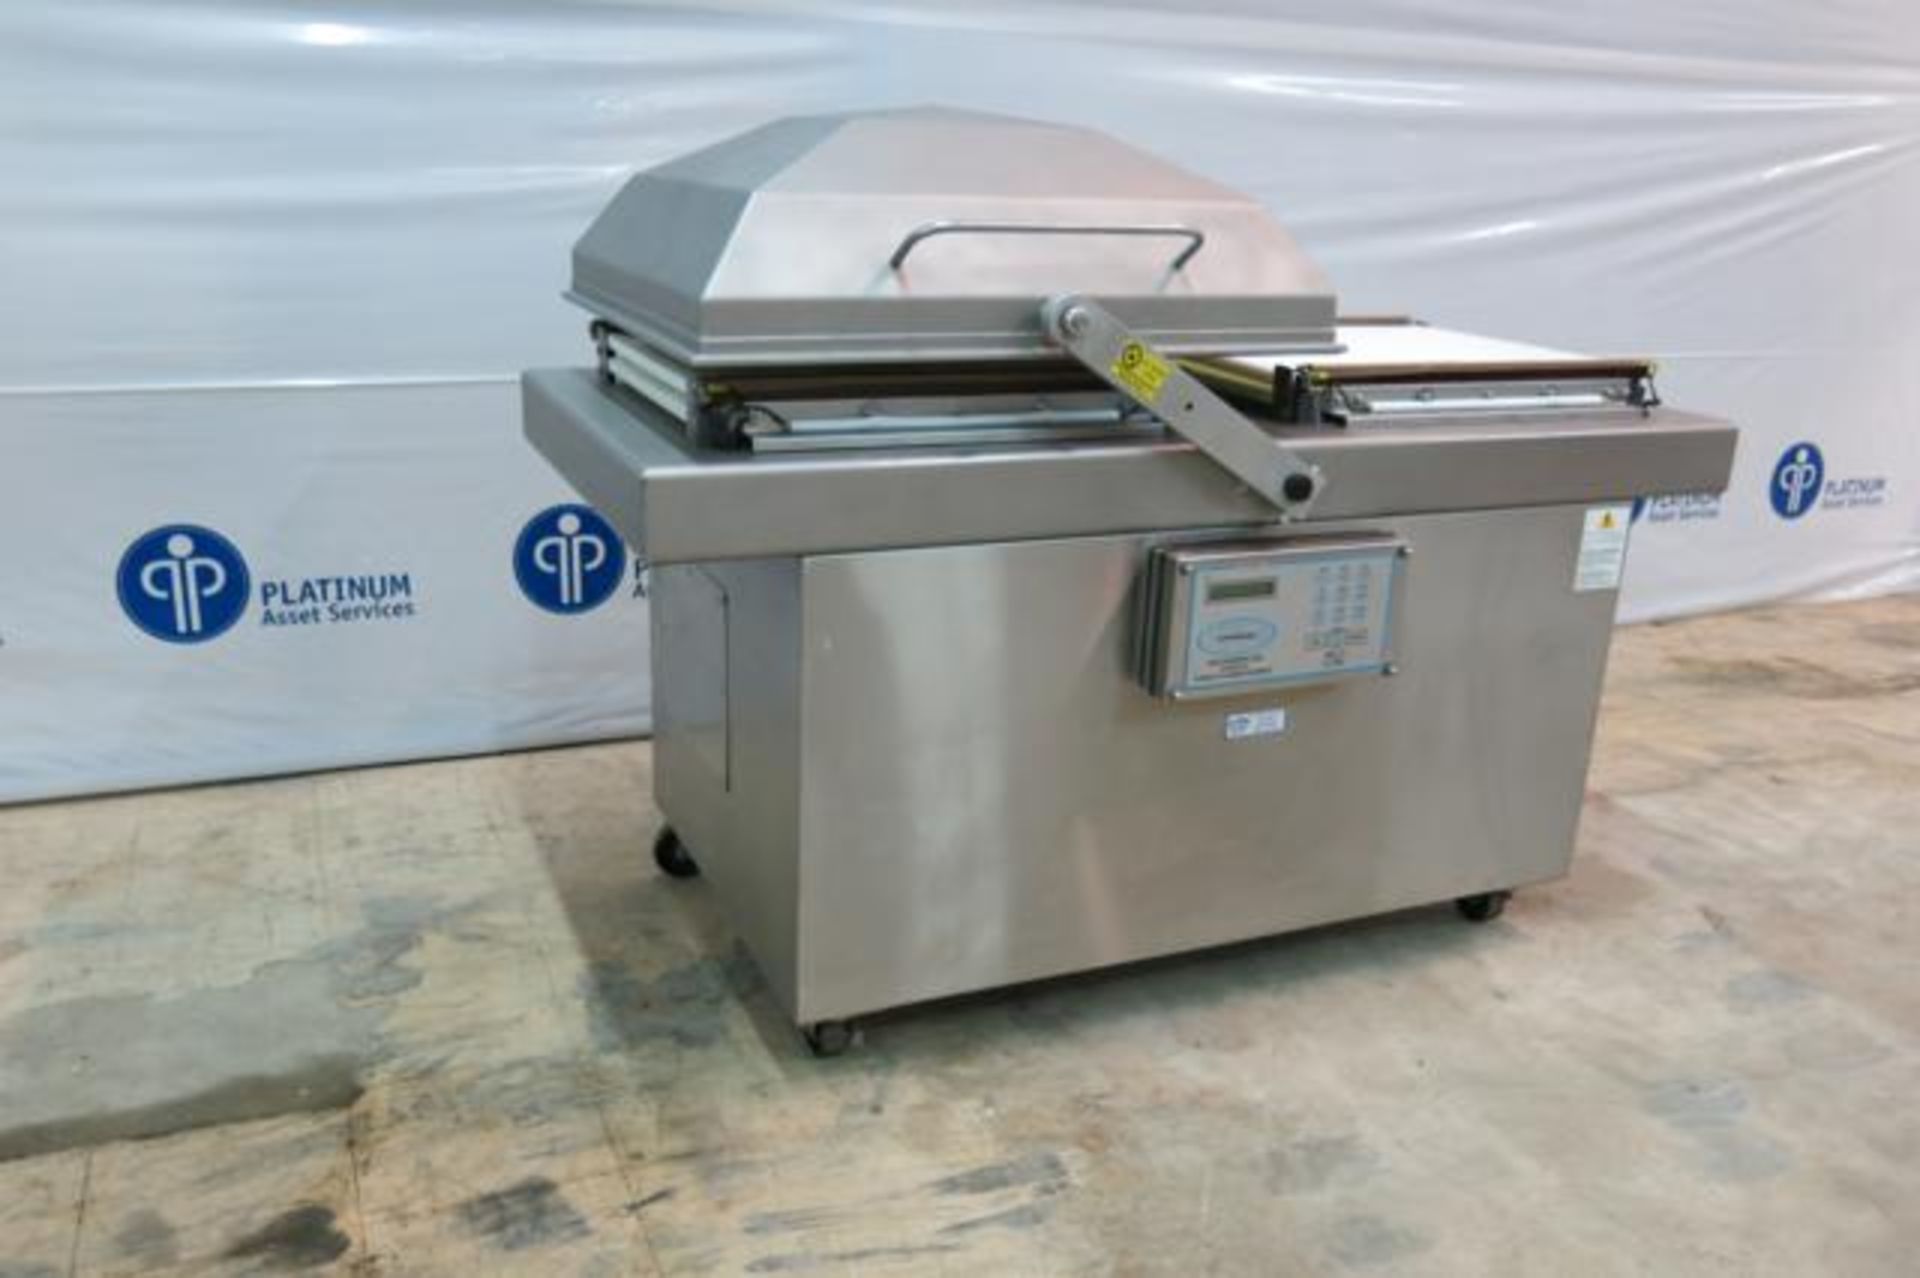 SIPROMAC, 600A, STAINLESS STEEL, DOUBLE CHAMBER VACUUM PACKAGING MACHINE, 2009, S/N 9676 - Image 2 of 9